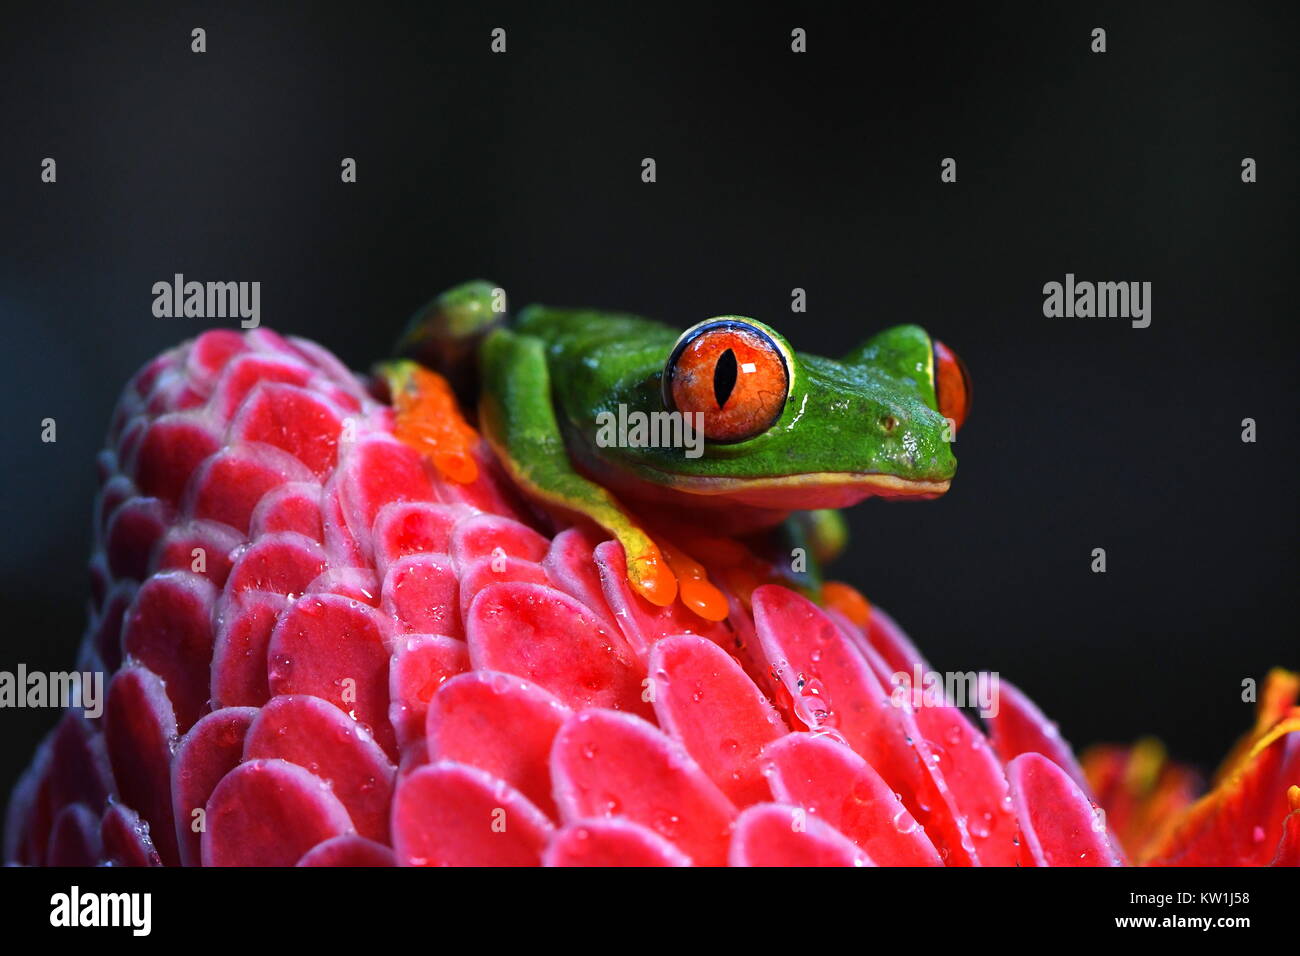 Red-eyed tree frog (Agalychnis callidryas) in Costa Rica lowland jungle Stock Photo